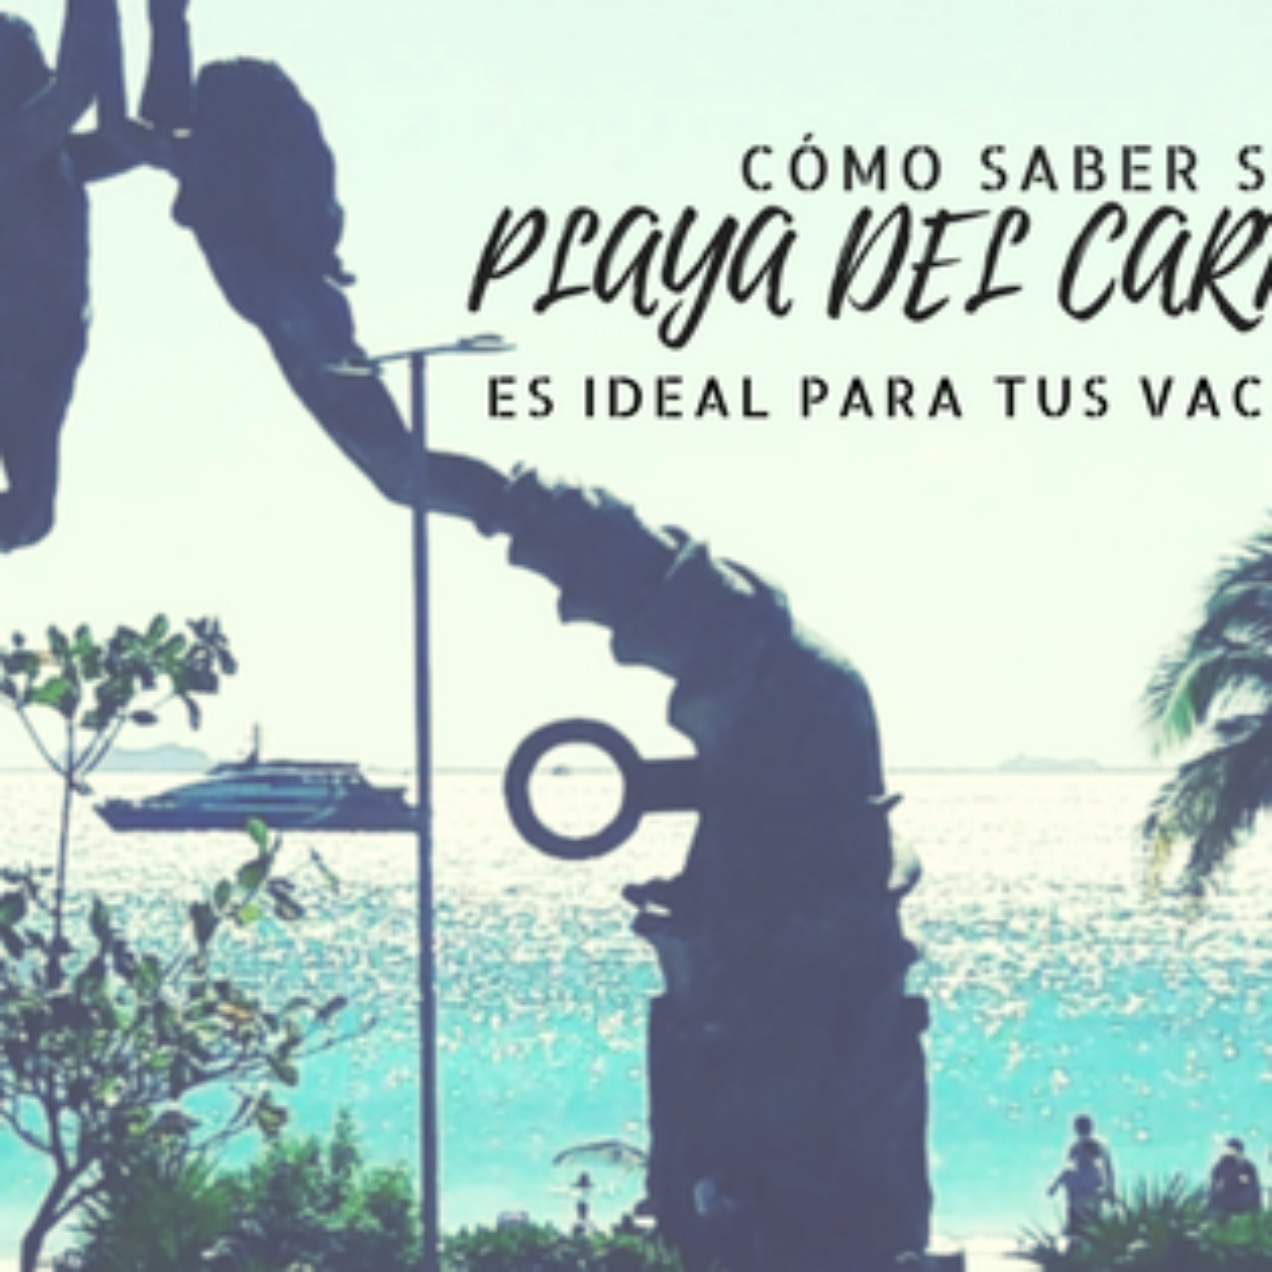 How Do You Know If Playa del Carmen Is Your Ideal Destination?